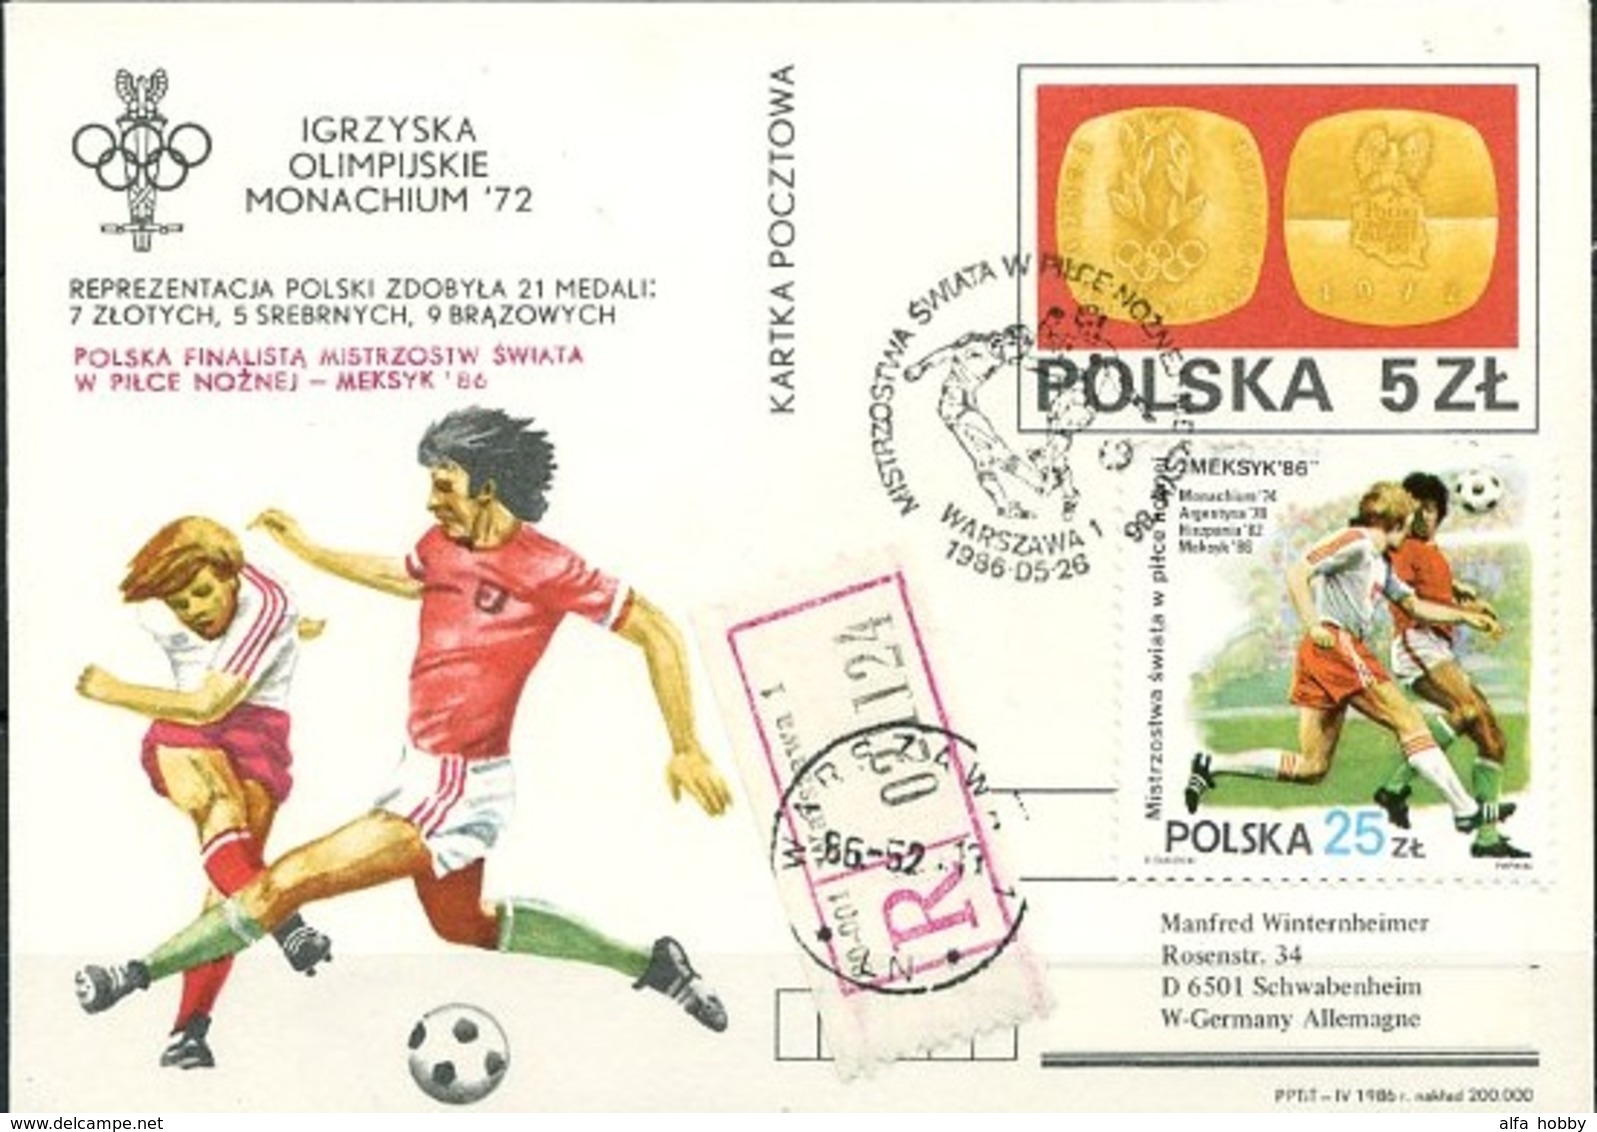 Poland, WC 1986, Olympic Games-72, RED OVERPRINTED Card - 1986 – Mexico